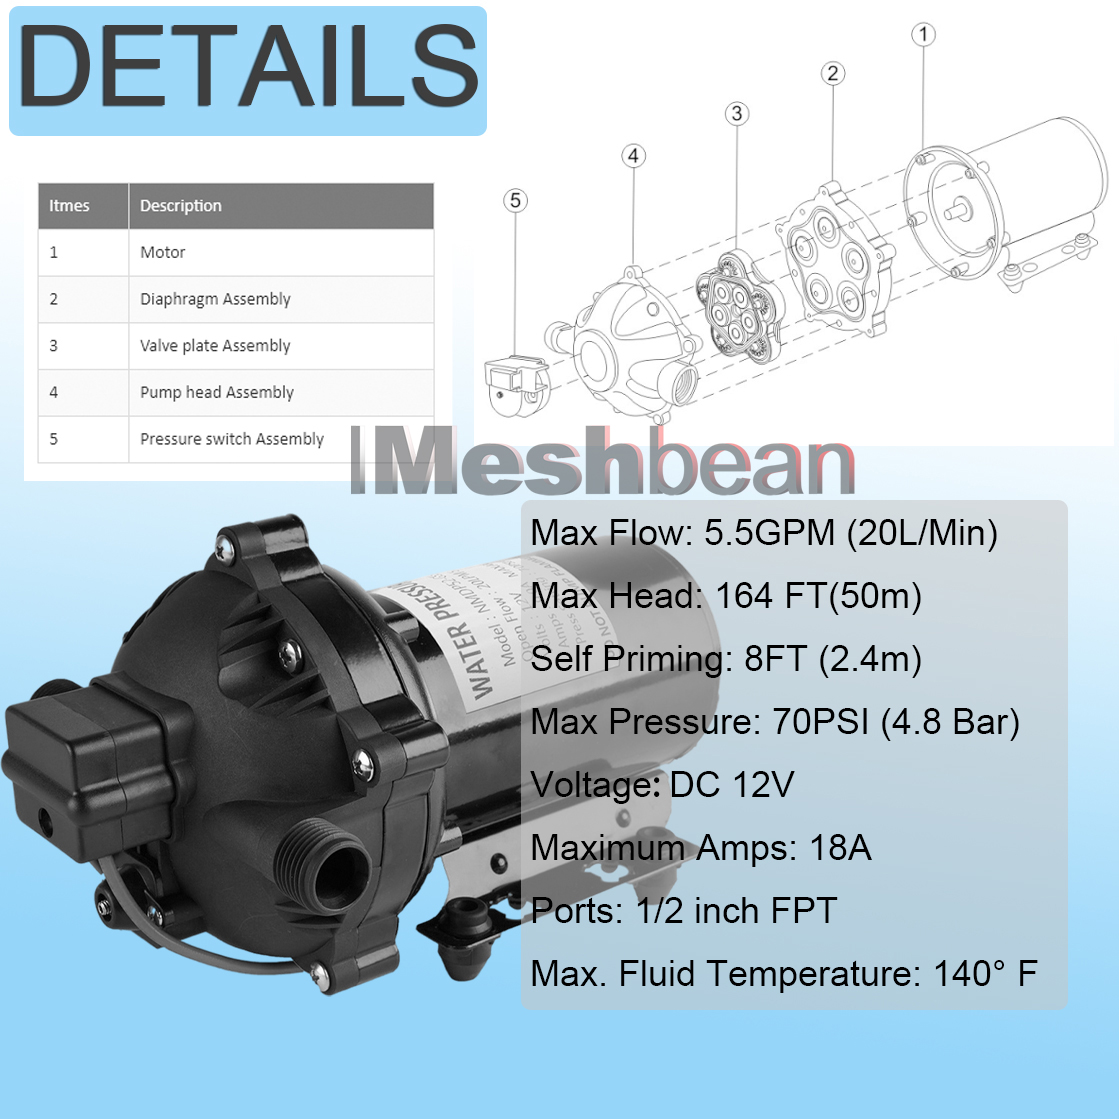 iMeshbean RV Water Pump 5.5 GPM 5.5 Gallons Per Minute 12V Water Pump Automatic 70 PSI Diaphragm Pump with 25 Foot Coiled Hose Washdown Pumps for Boats Caravan Rv Marine Yacht - image 2 of 7